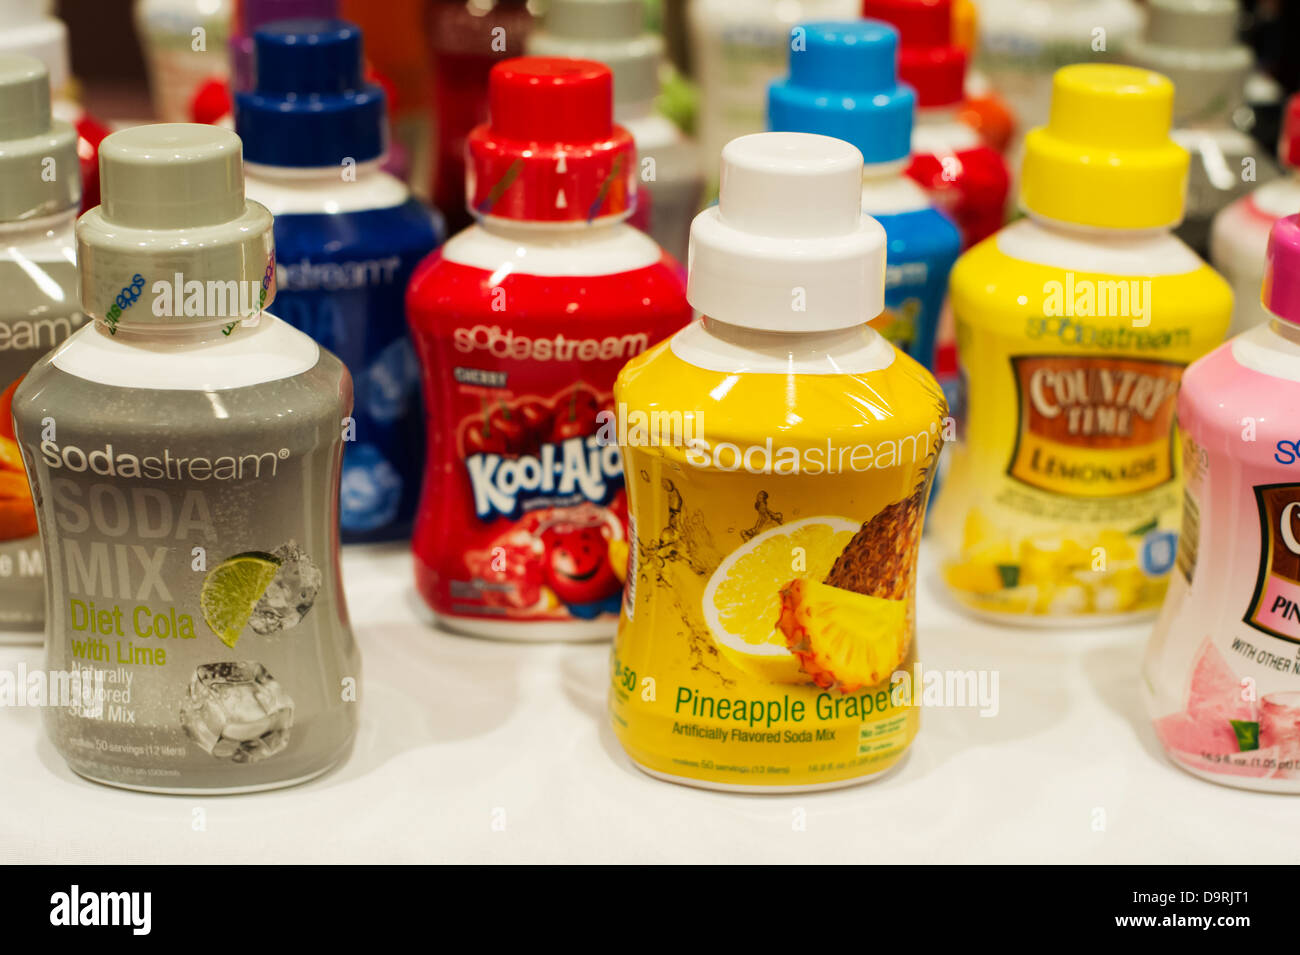 Sodastream displays its products at the 2013 Holiday Gift Guide Show held in midtown in New York Stock Photo